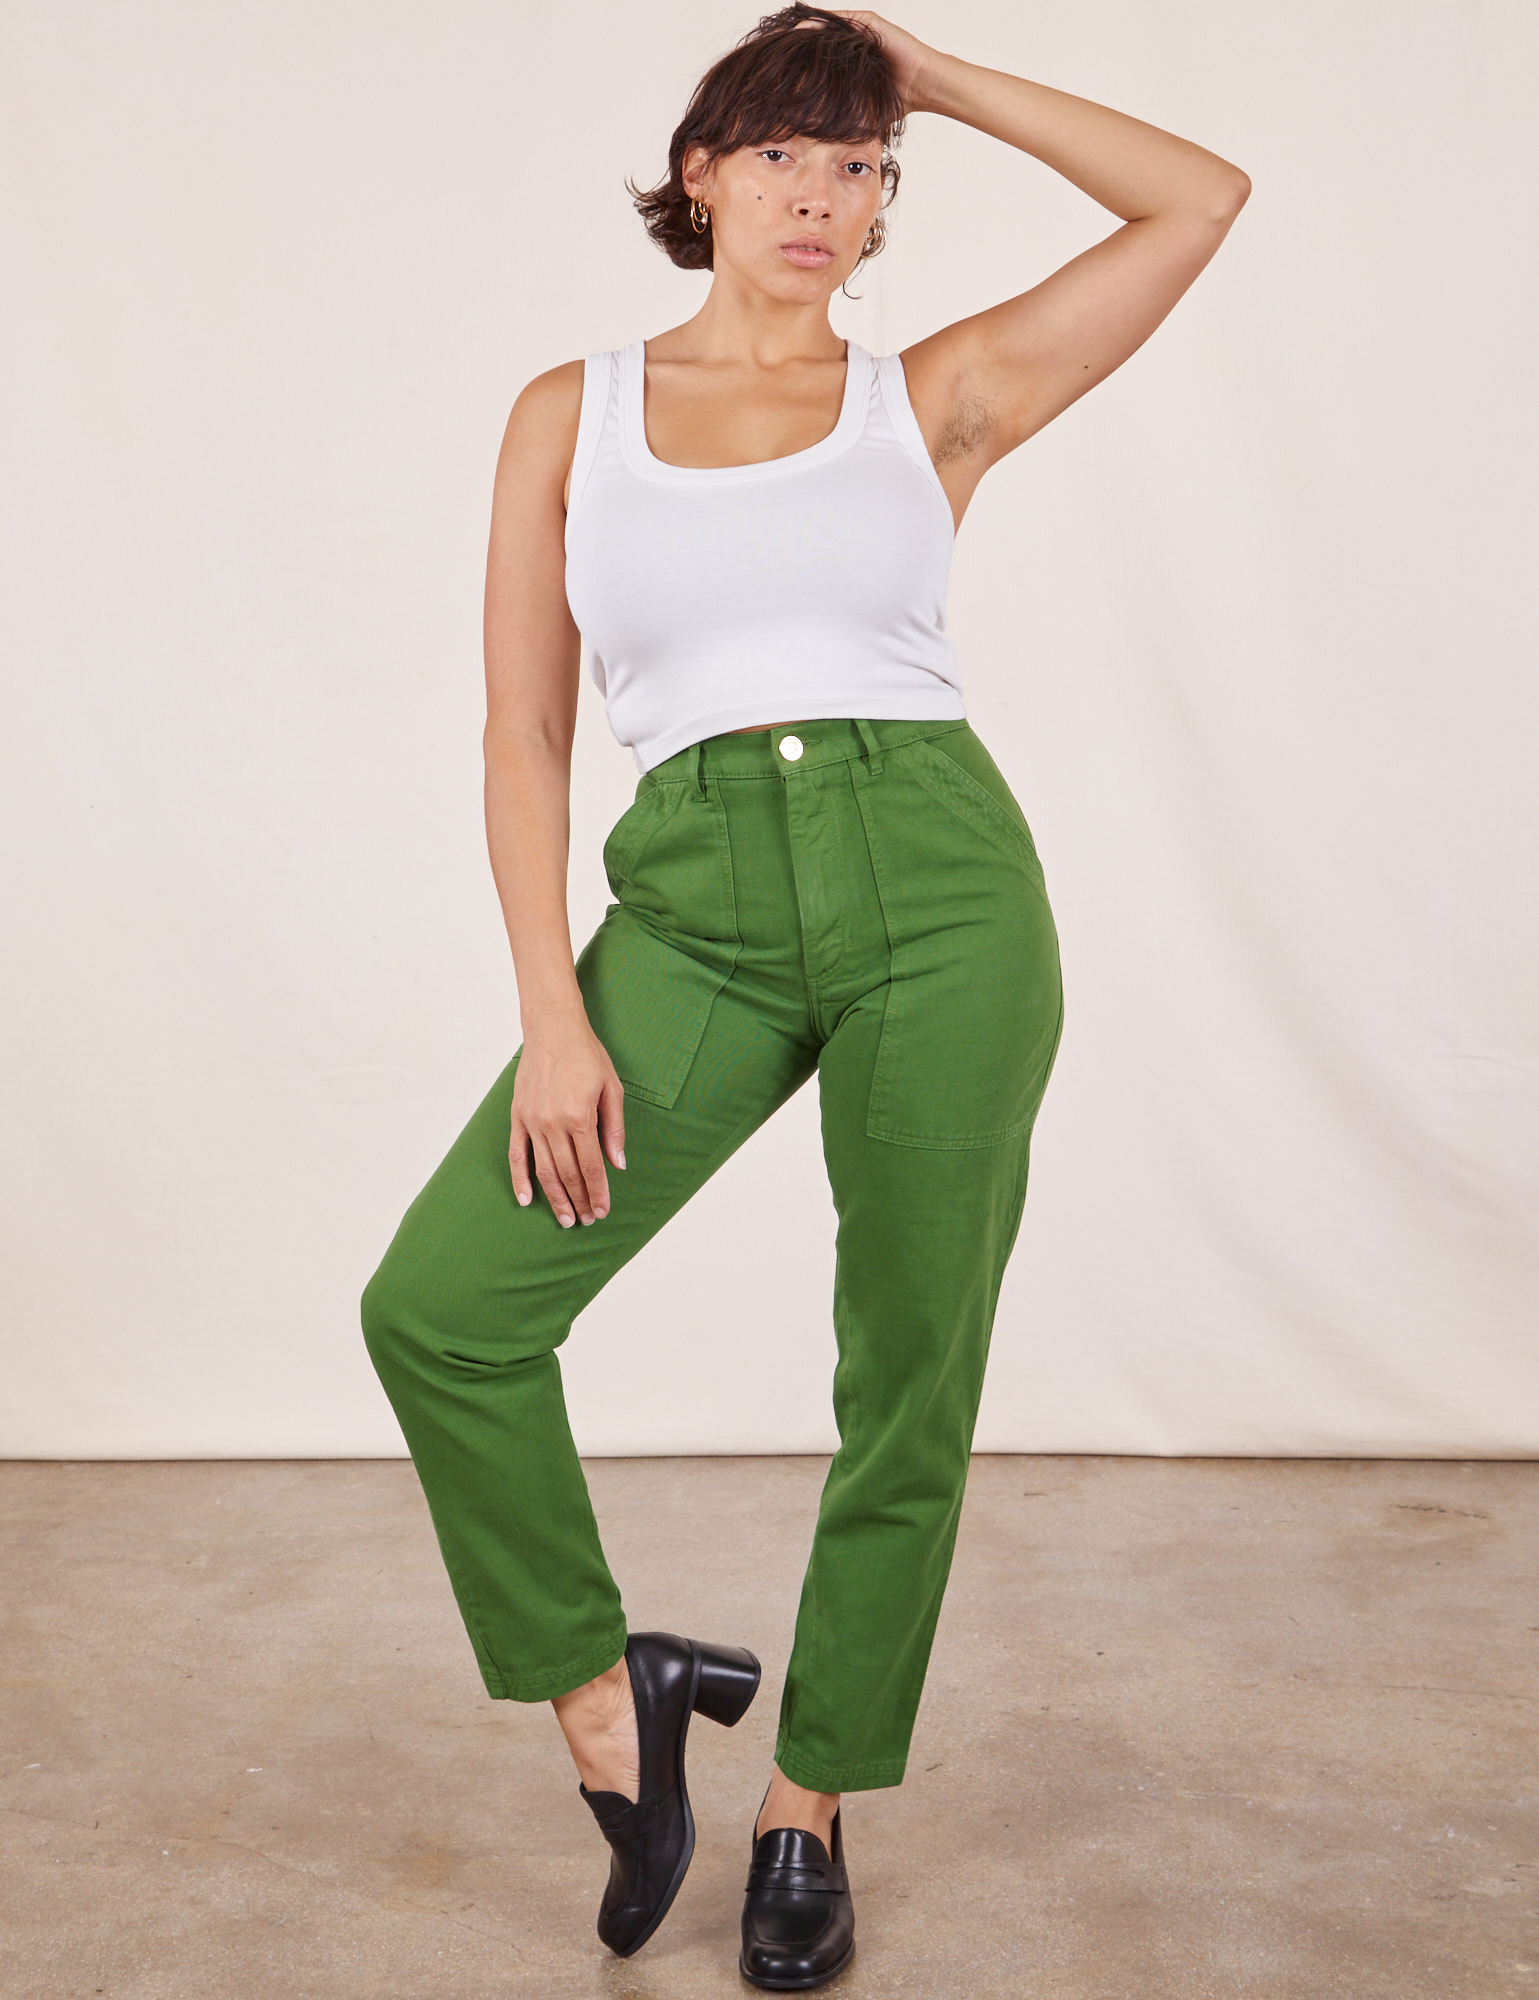 Tiara is 5&#39;4&quot; and wearing XS Pencil Pants in Lawn Green paired with vintage off-white Cropped Tank Top